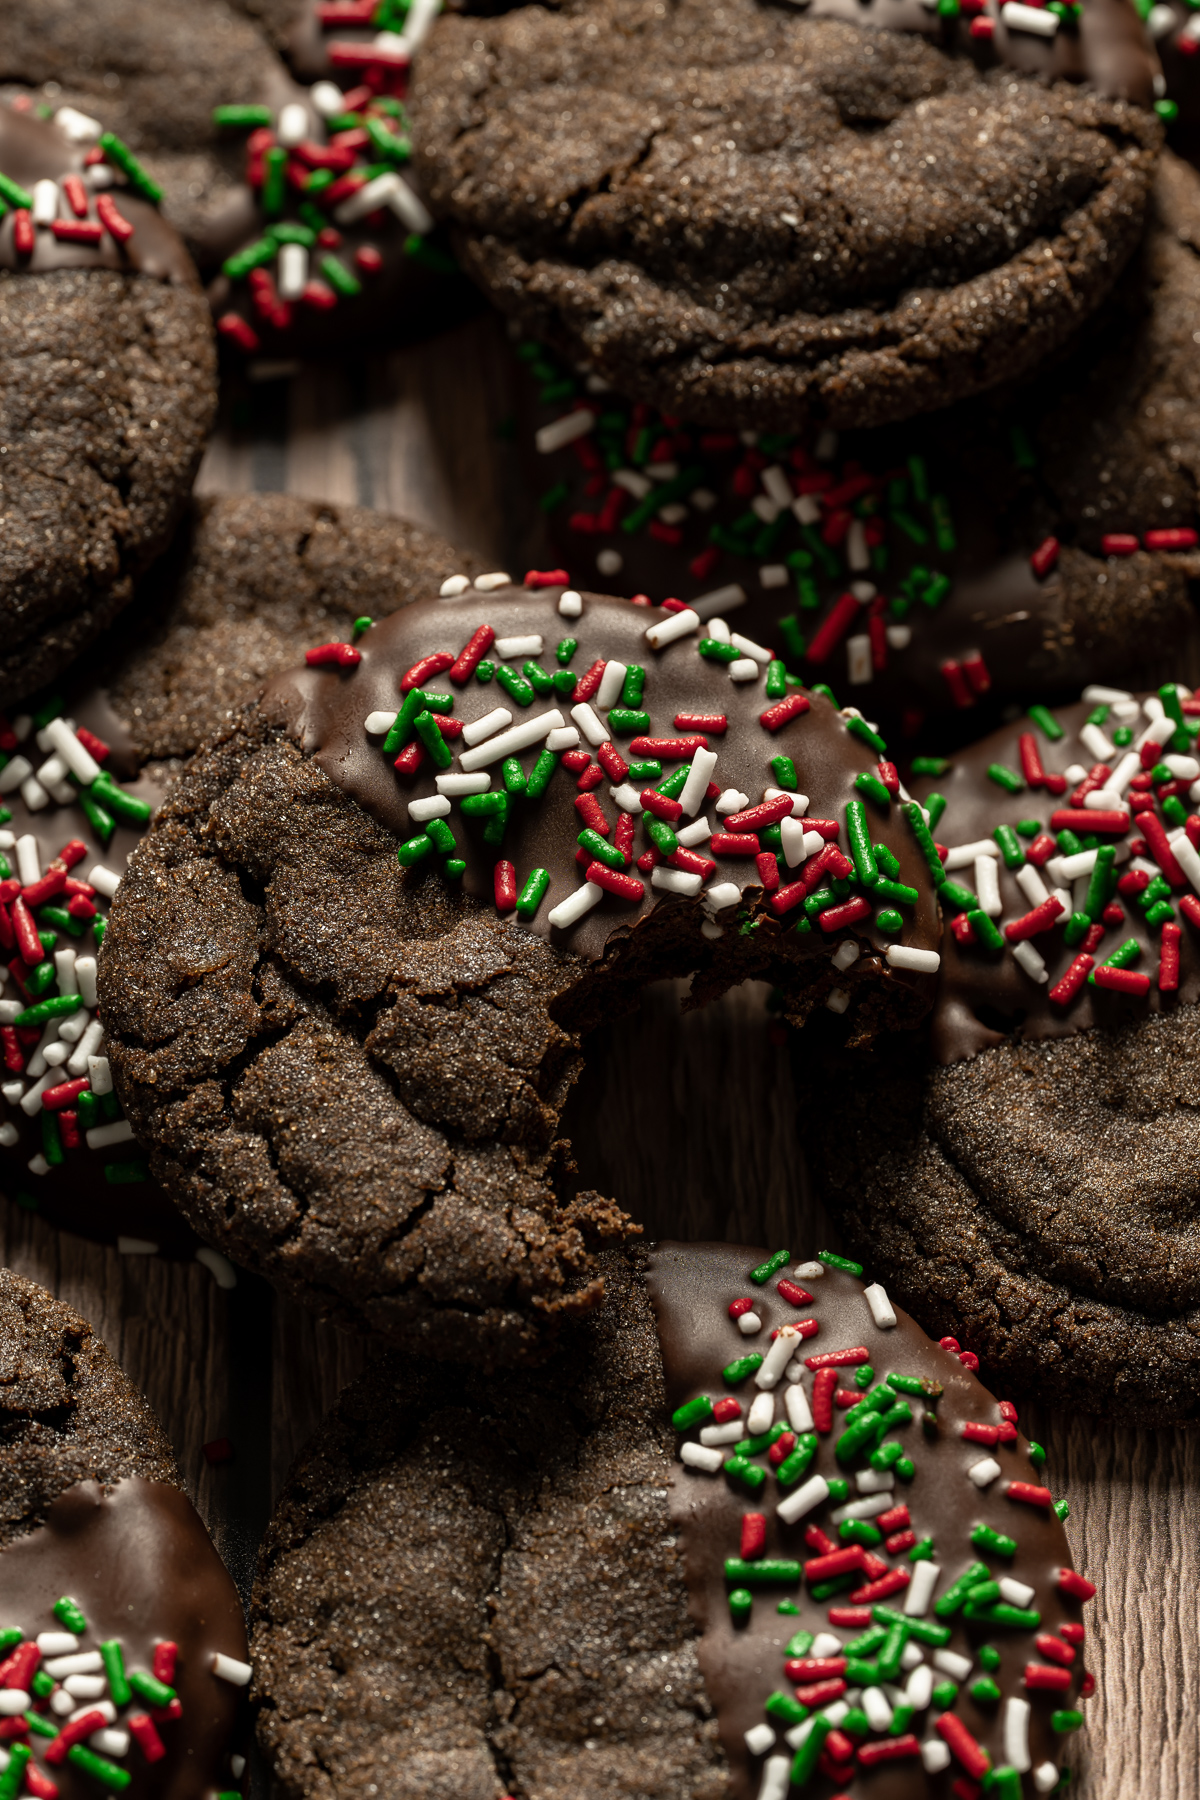 Chewy chocolate gingerbread cookies with red green and white sprinkles and a bite taken out of one cookie